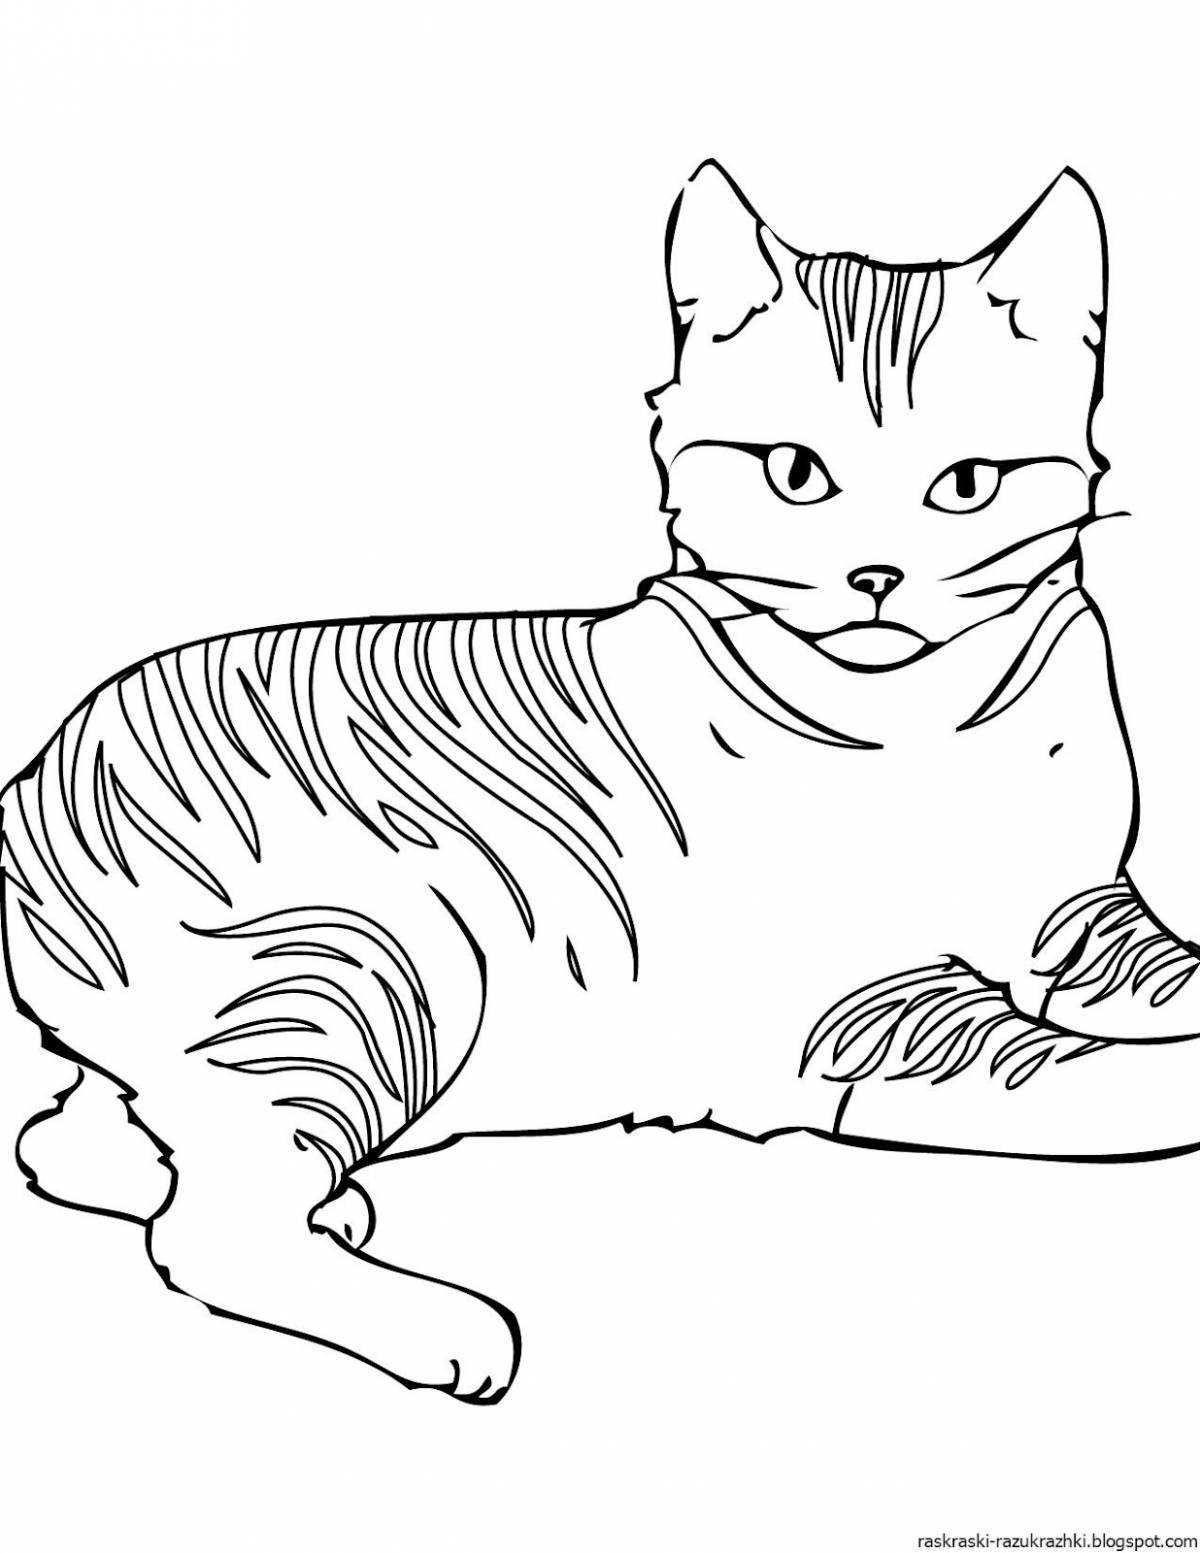 Colourful cat coloring page